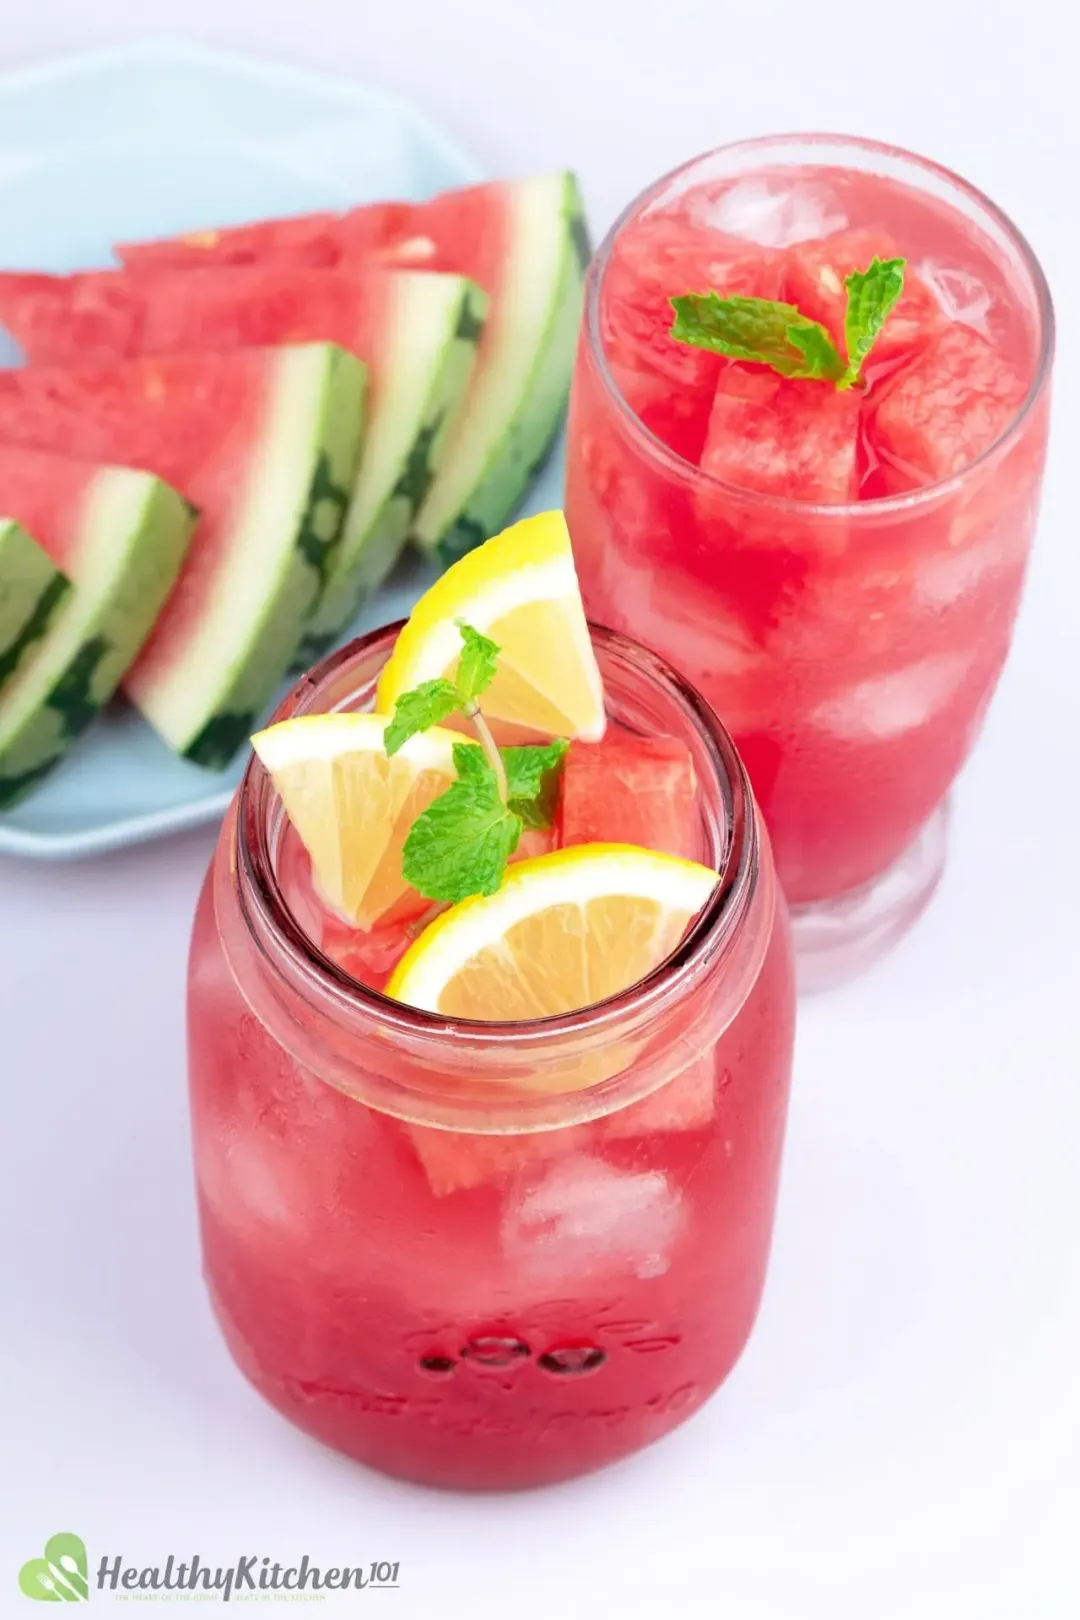 Watermelon Juice 101: How to Make, Store, and Serve with a Boost 